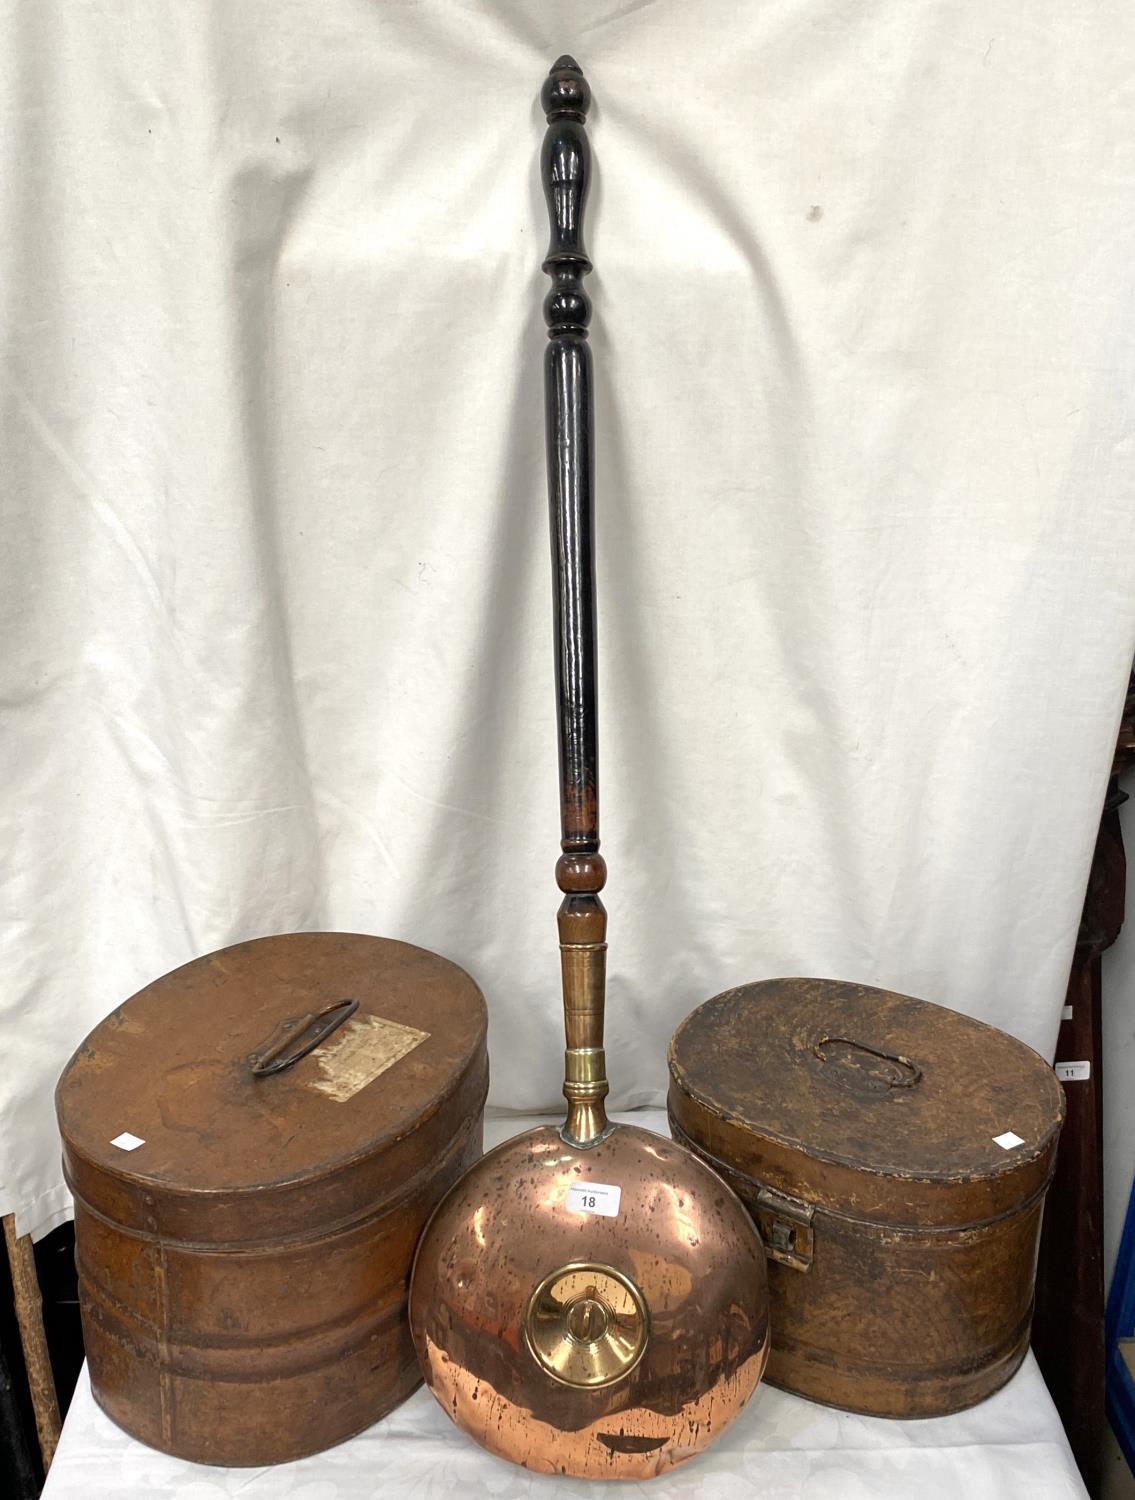 A 19th century hot water copper bed warmer; 2 19th century metal hat boxes